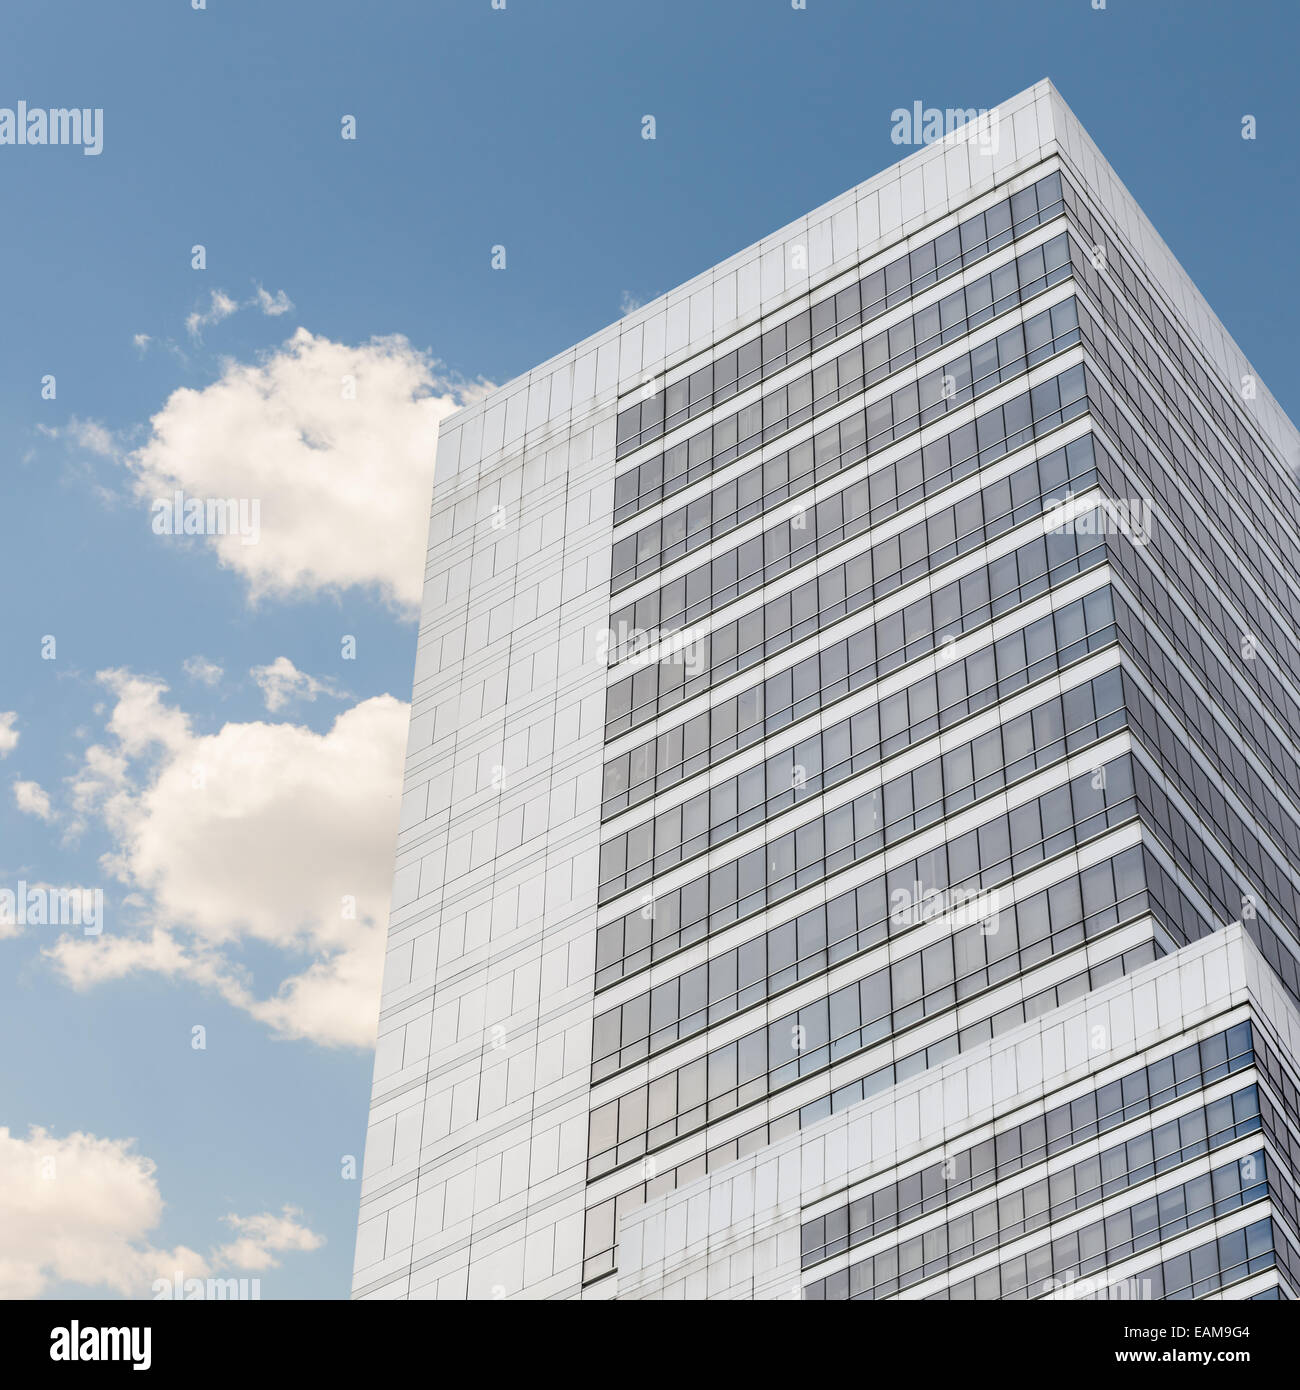 detail of a tall office skyscraper with mirror windows Stock Photo